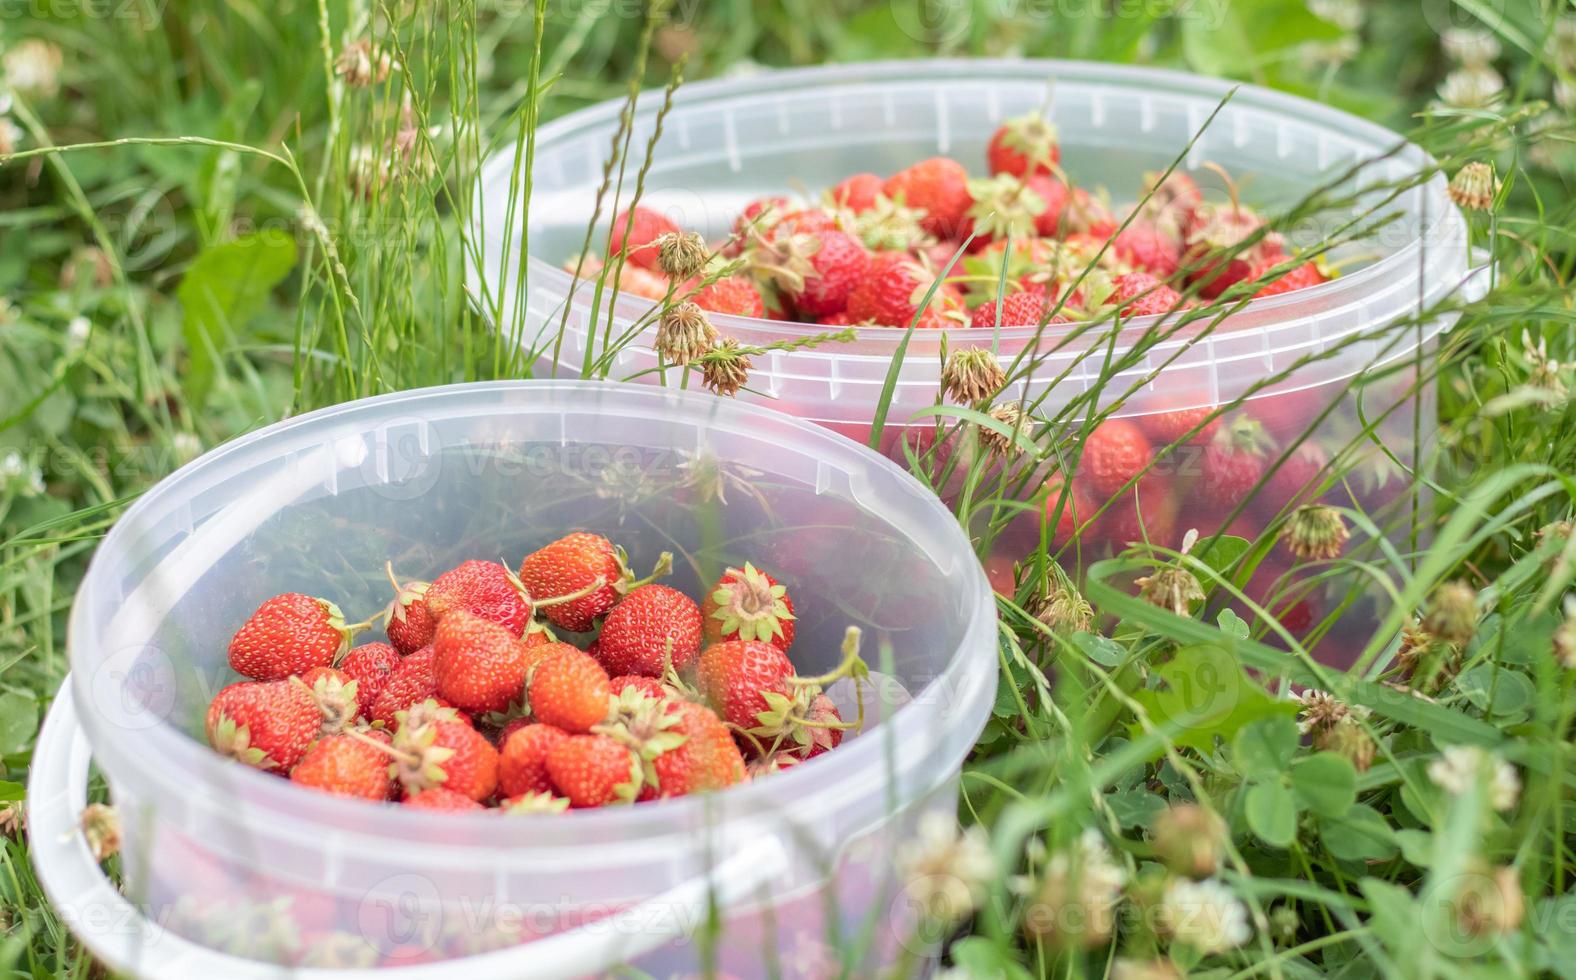 Full bucket of freshly picked strawberries in the summer garden. Close-up of strawberries in a plastic basket. Organic and fresh berry at a farmers market, in a bucket on a strawberry patch. photo